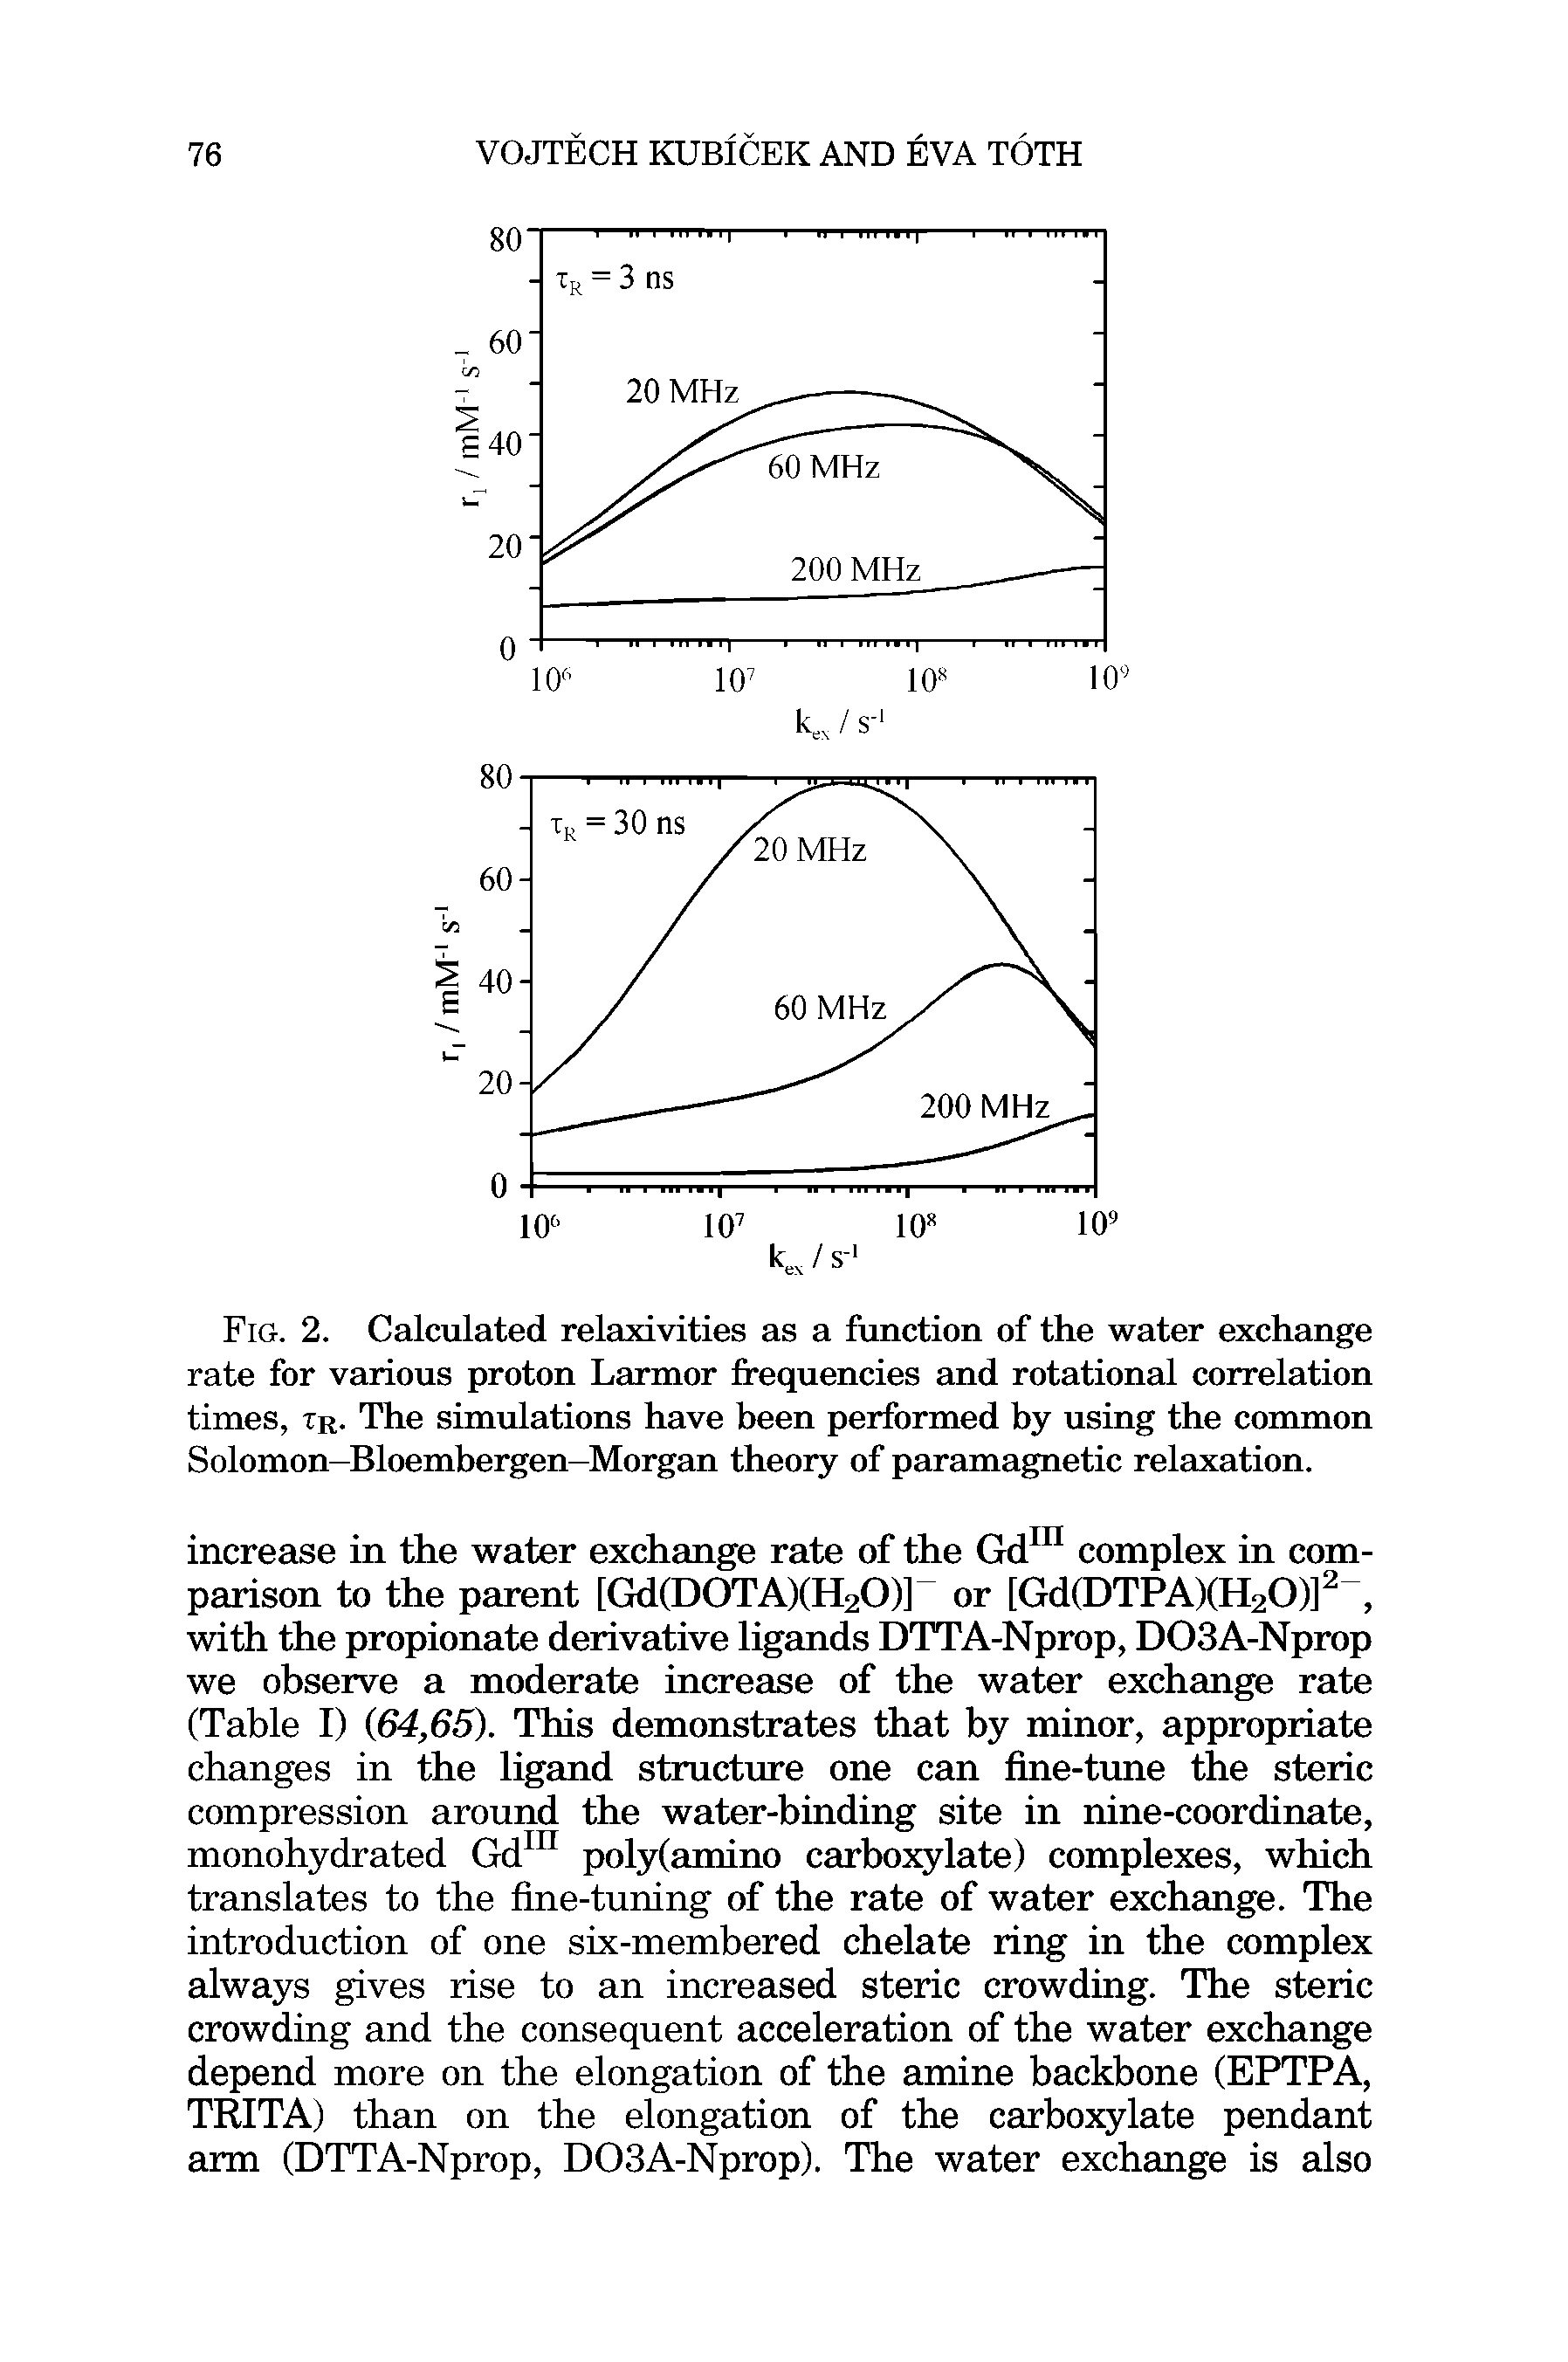 Fig. 2. Calculated relaxivities as a function of the water exchange rate for various proton Larmor frequencies and rotational correlation times, tr. The simulations have been performed by using the common Solomon-Bloembergen-Morgan theory of paramagnetic relaxation.